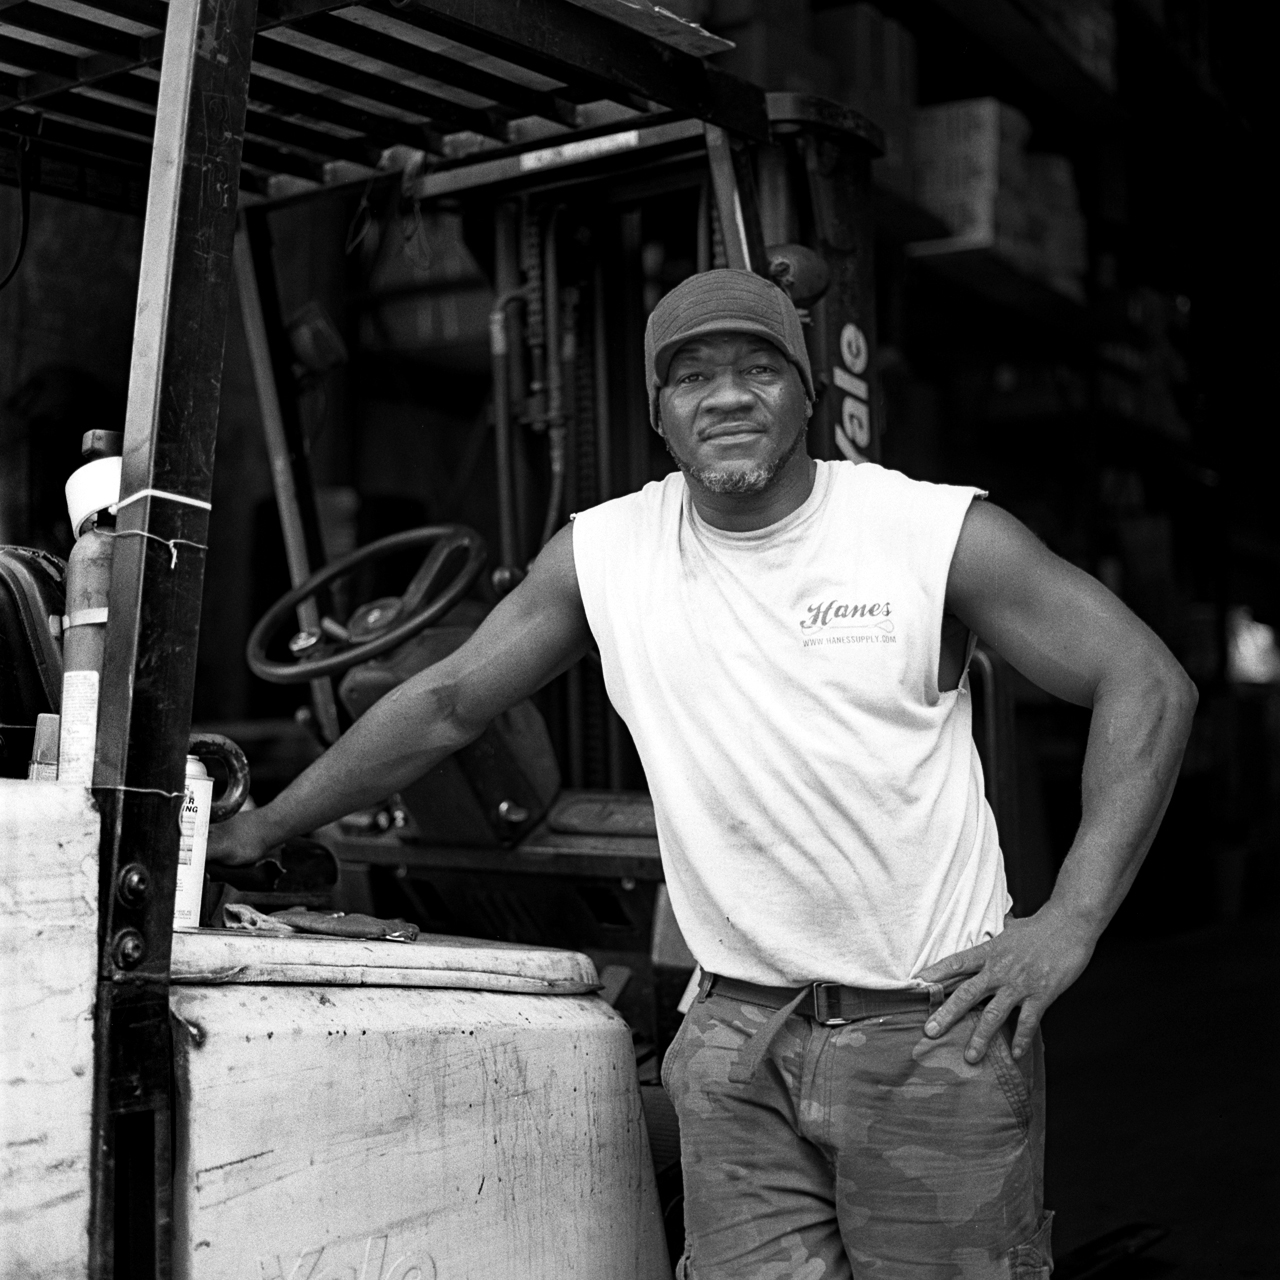  Robert, warehouse manager for Reinforcing Supply, beside his forklift. Previous to his position at Reinforcing Supply, Robert was a photographer for Russell Simmons' Def Jam and a printer at a photo lab in Manhattan.  Williamsburg, Brooklyn, N.Y. (S